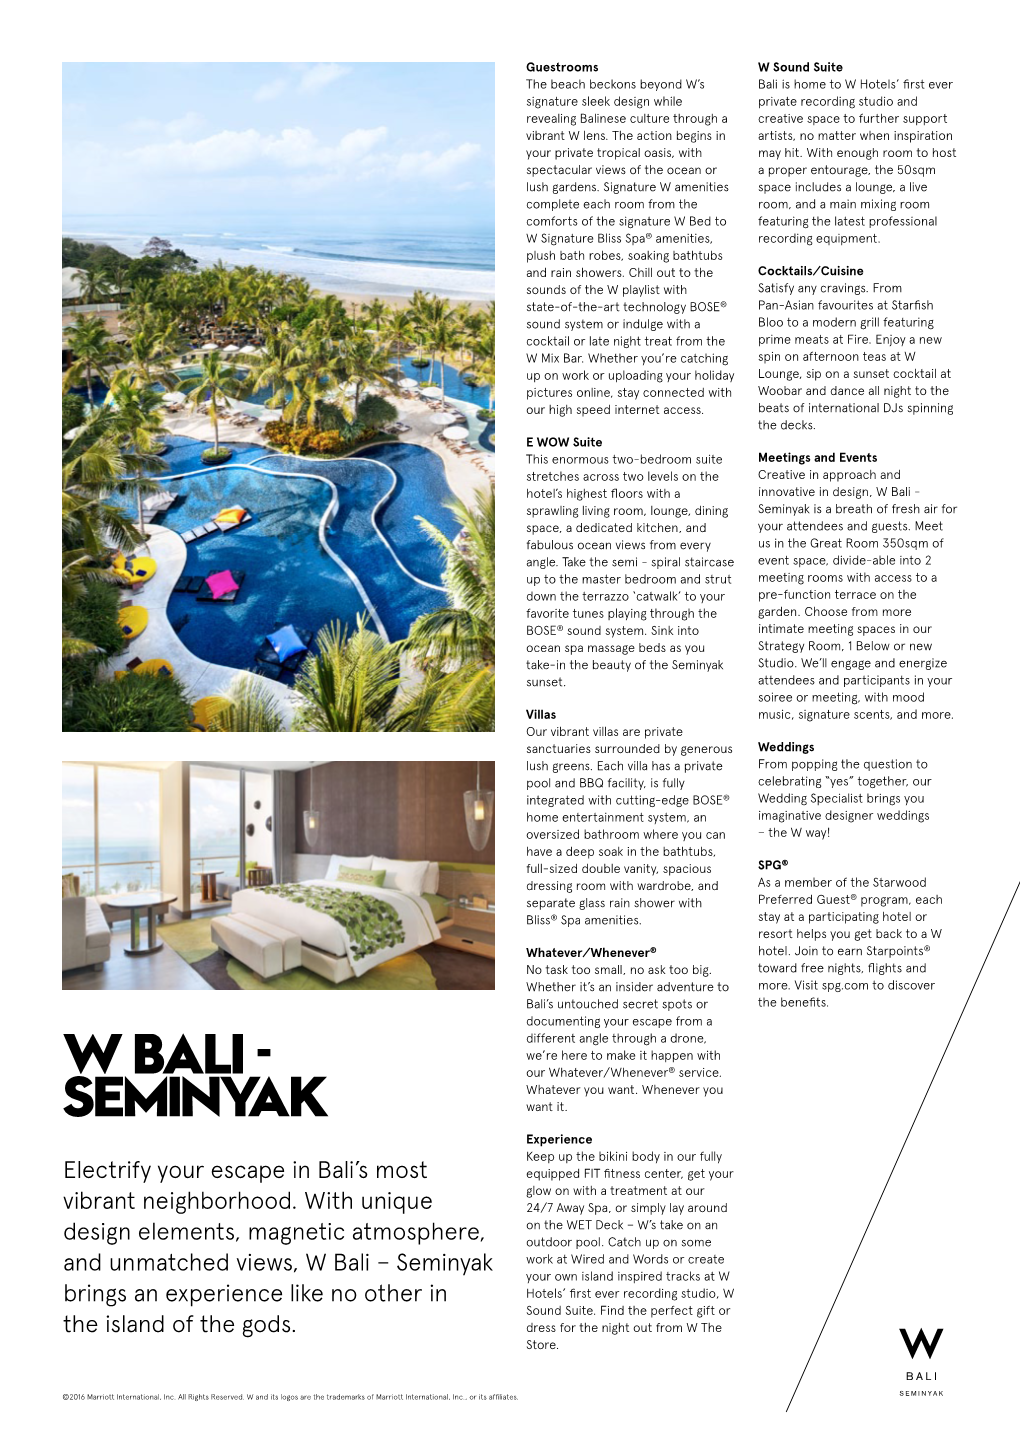 W Bali - Sprawling Living Room, Lounge, Dining Seminyak Is a Breath of Fresh Air for Space, a Dedicated Kitchen, and Your Attendees and Guests